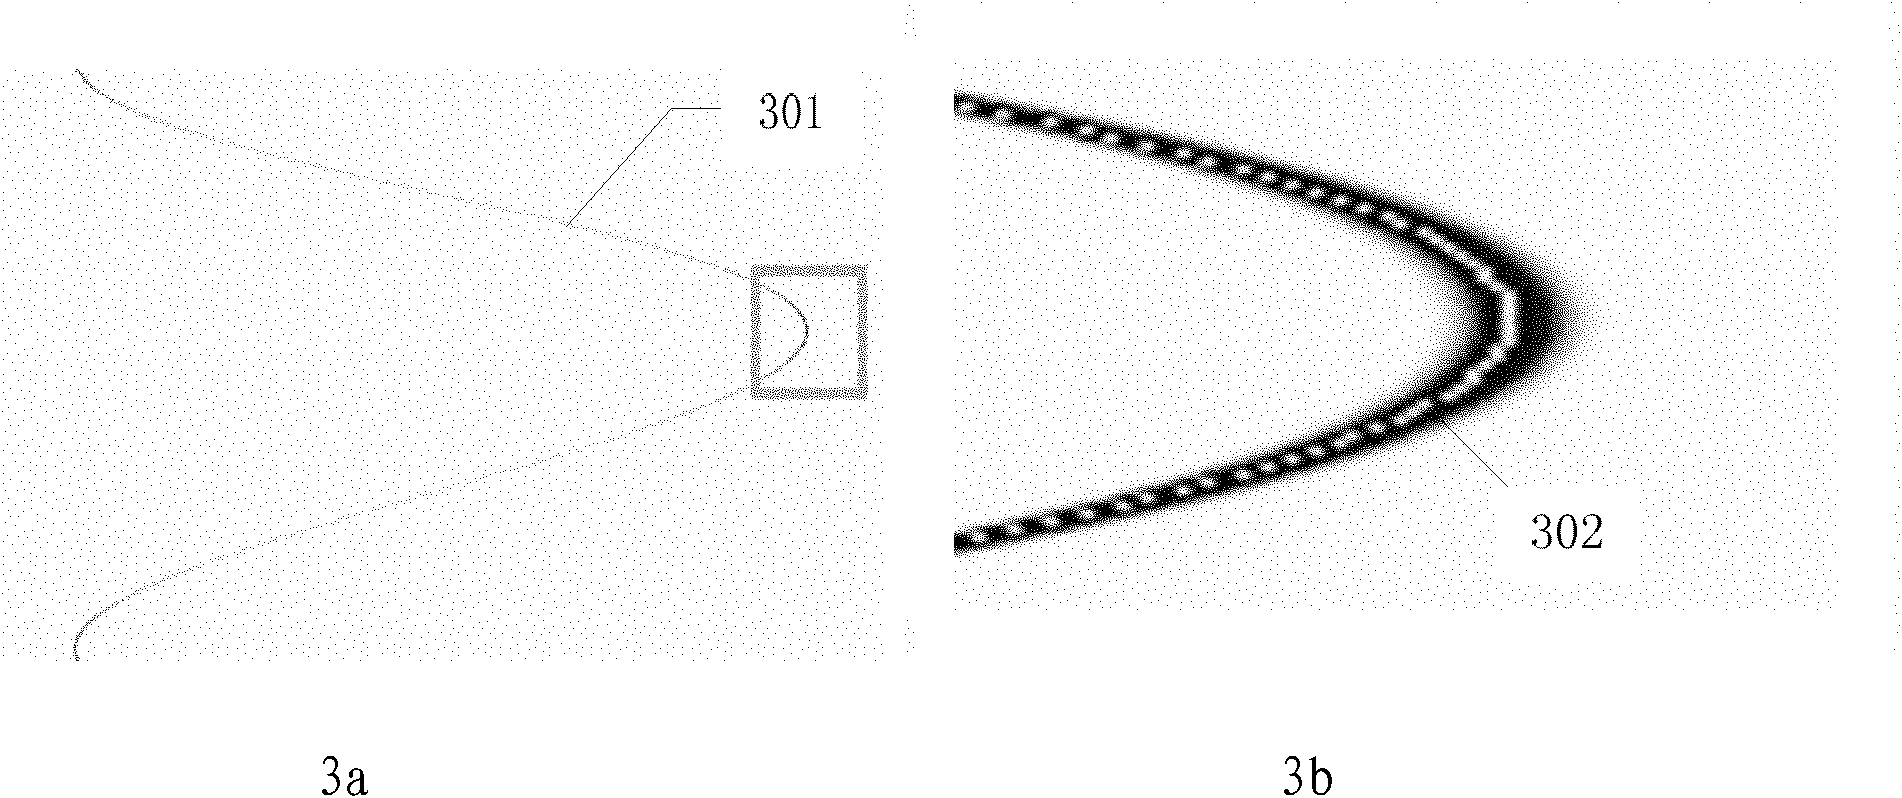 Method and system for eliminating geometrical artifacts in CT (Computerized Tomography) image